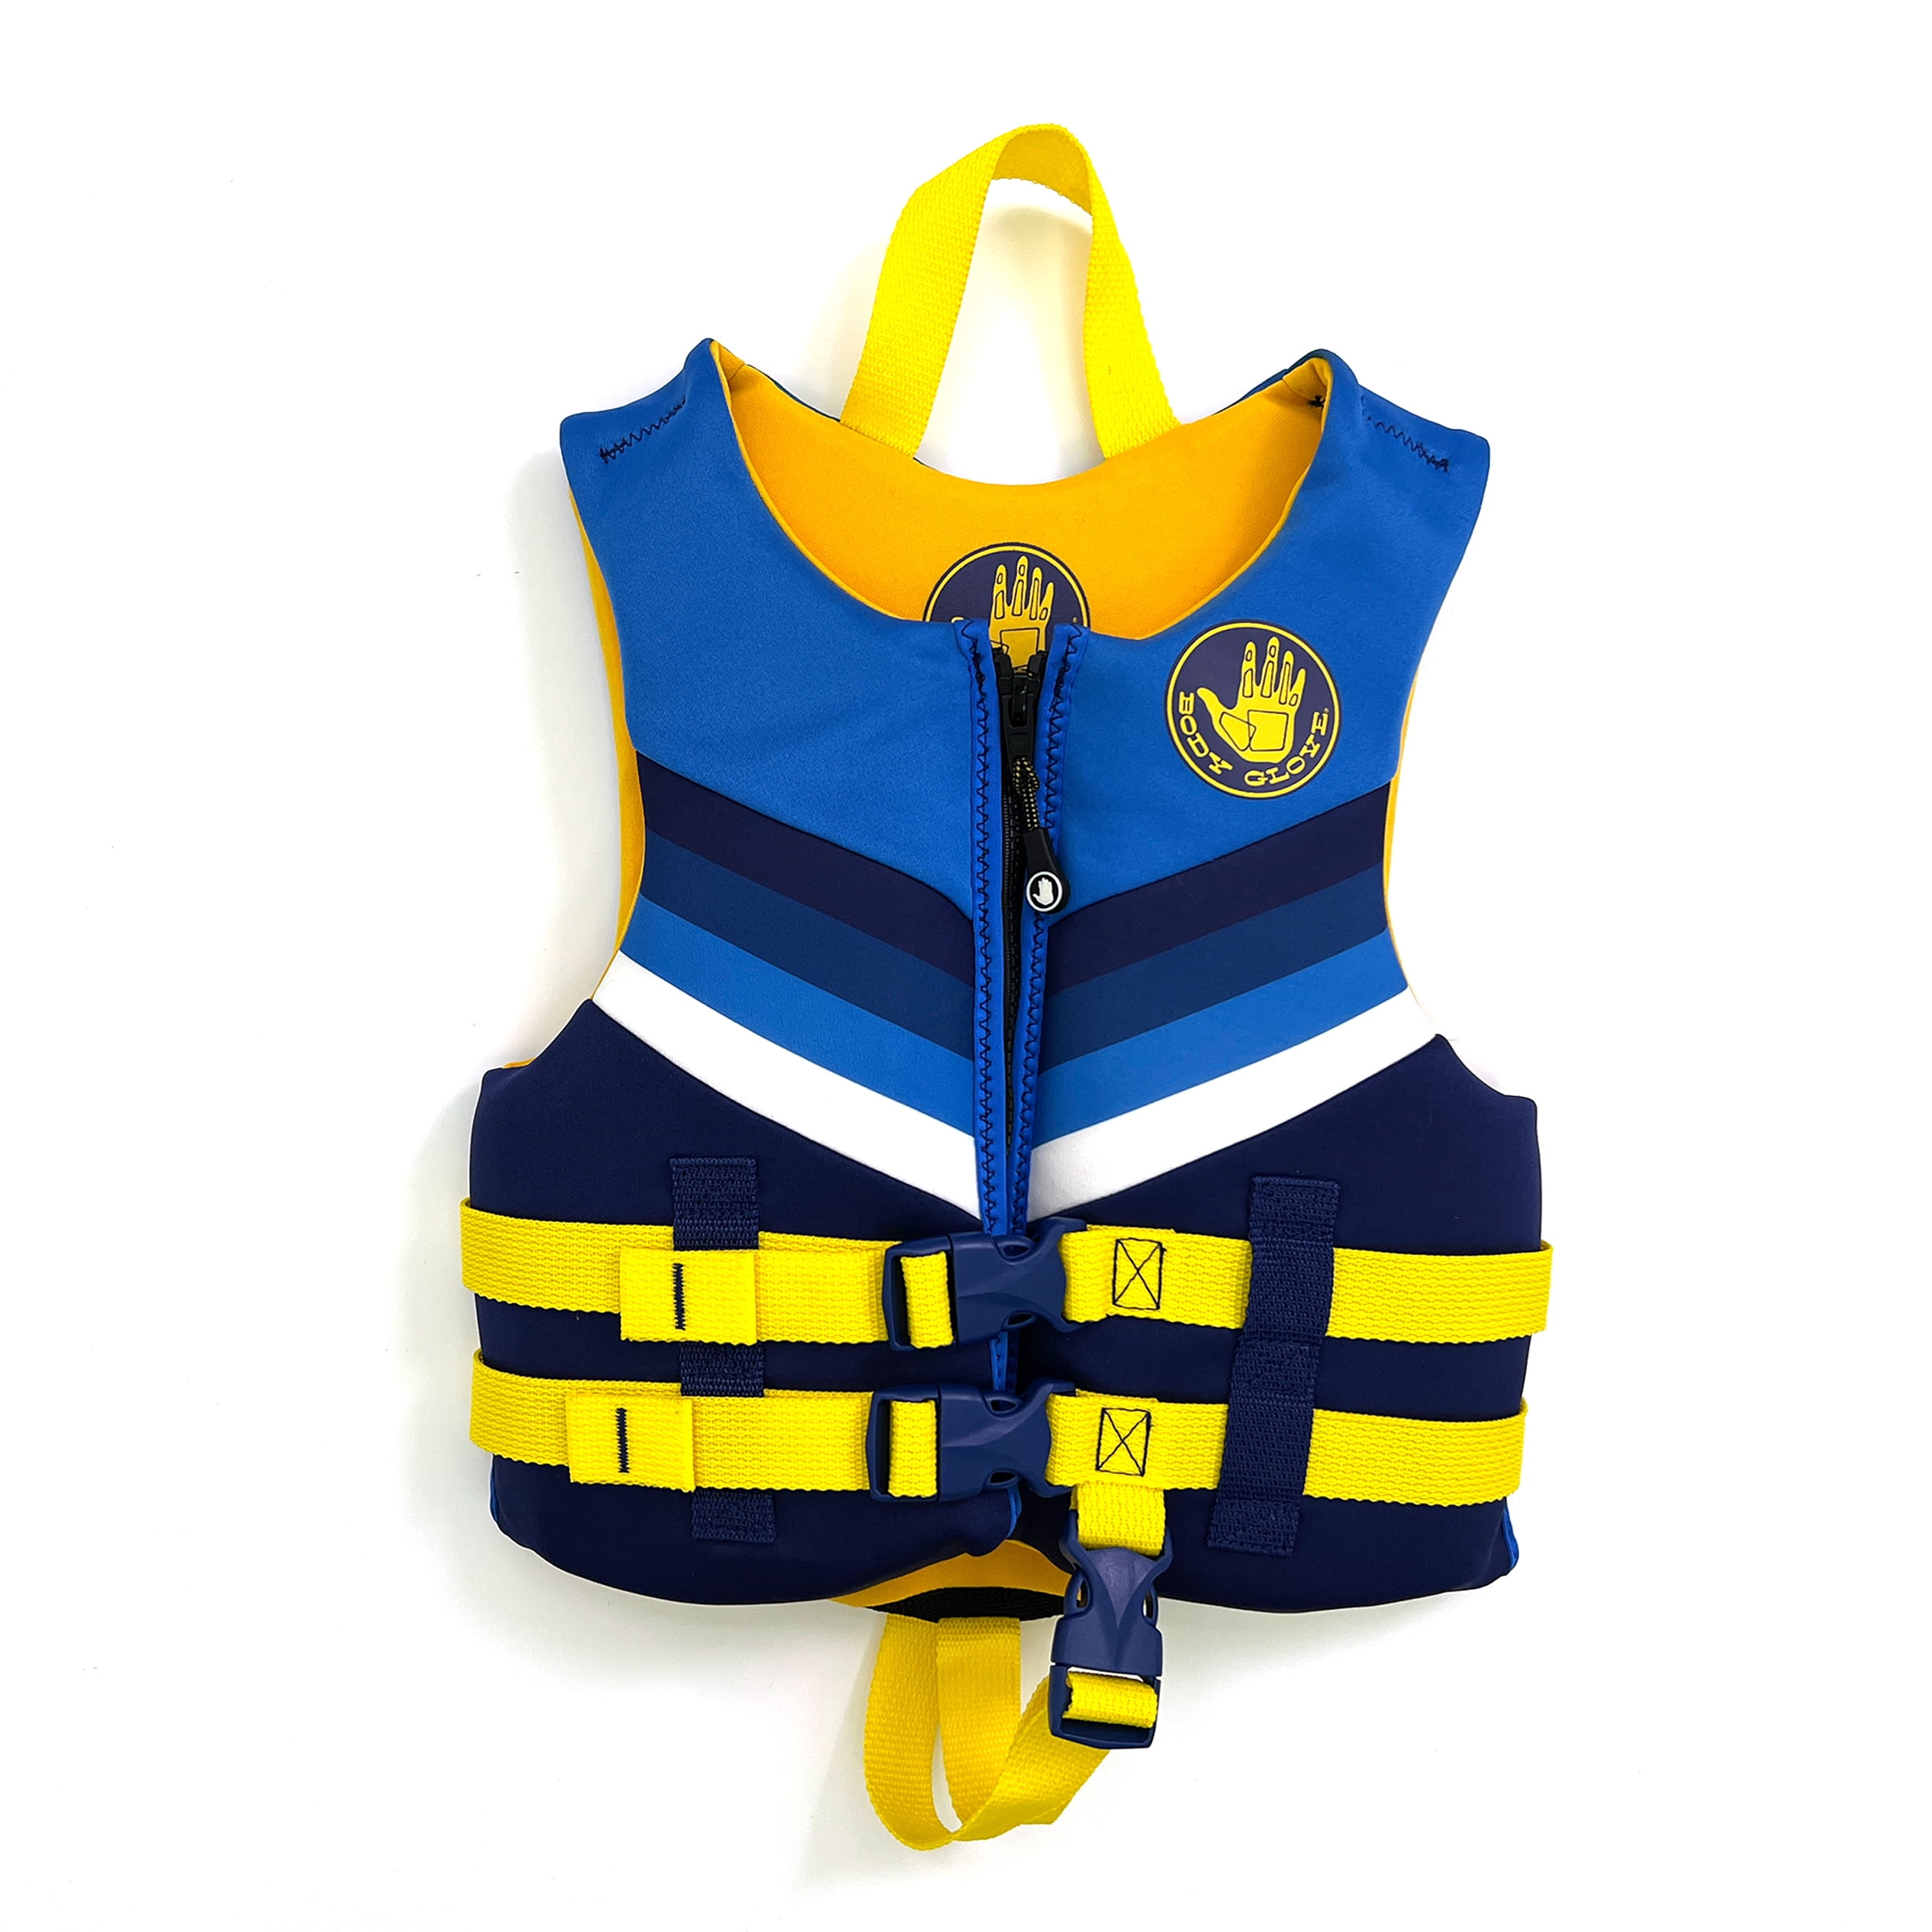 Details about   Adult Kid Safety Life Jacket Aid Sailing Boating Swimming Vest Fishing J8F3 